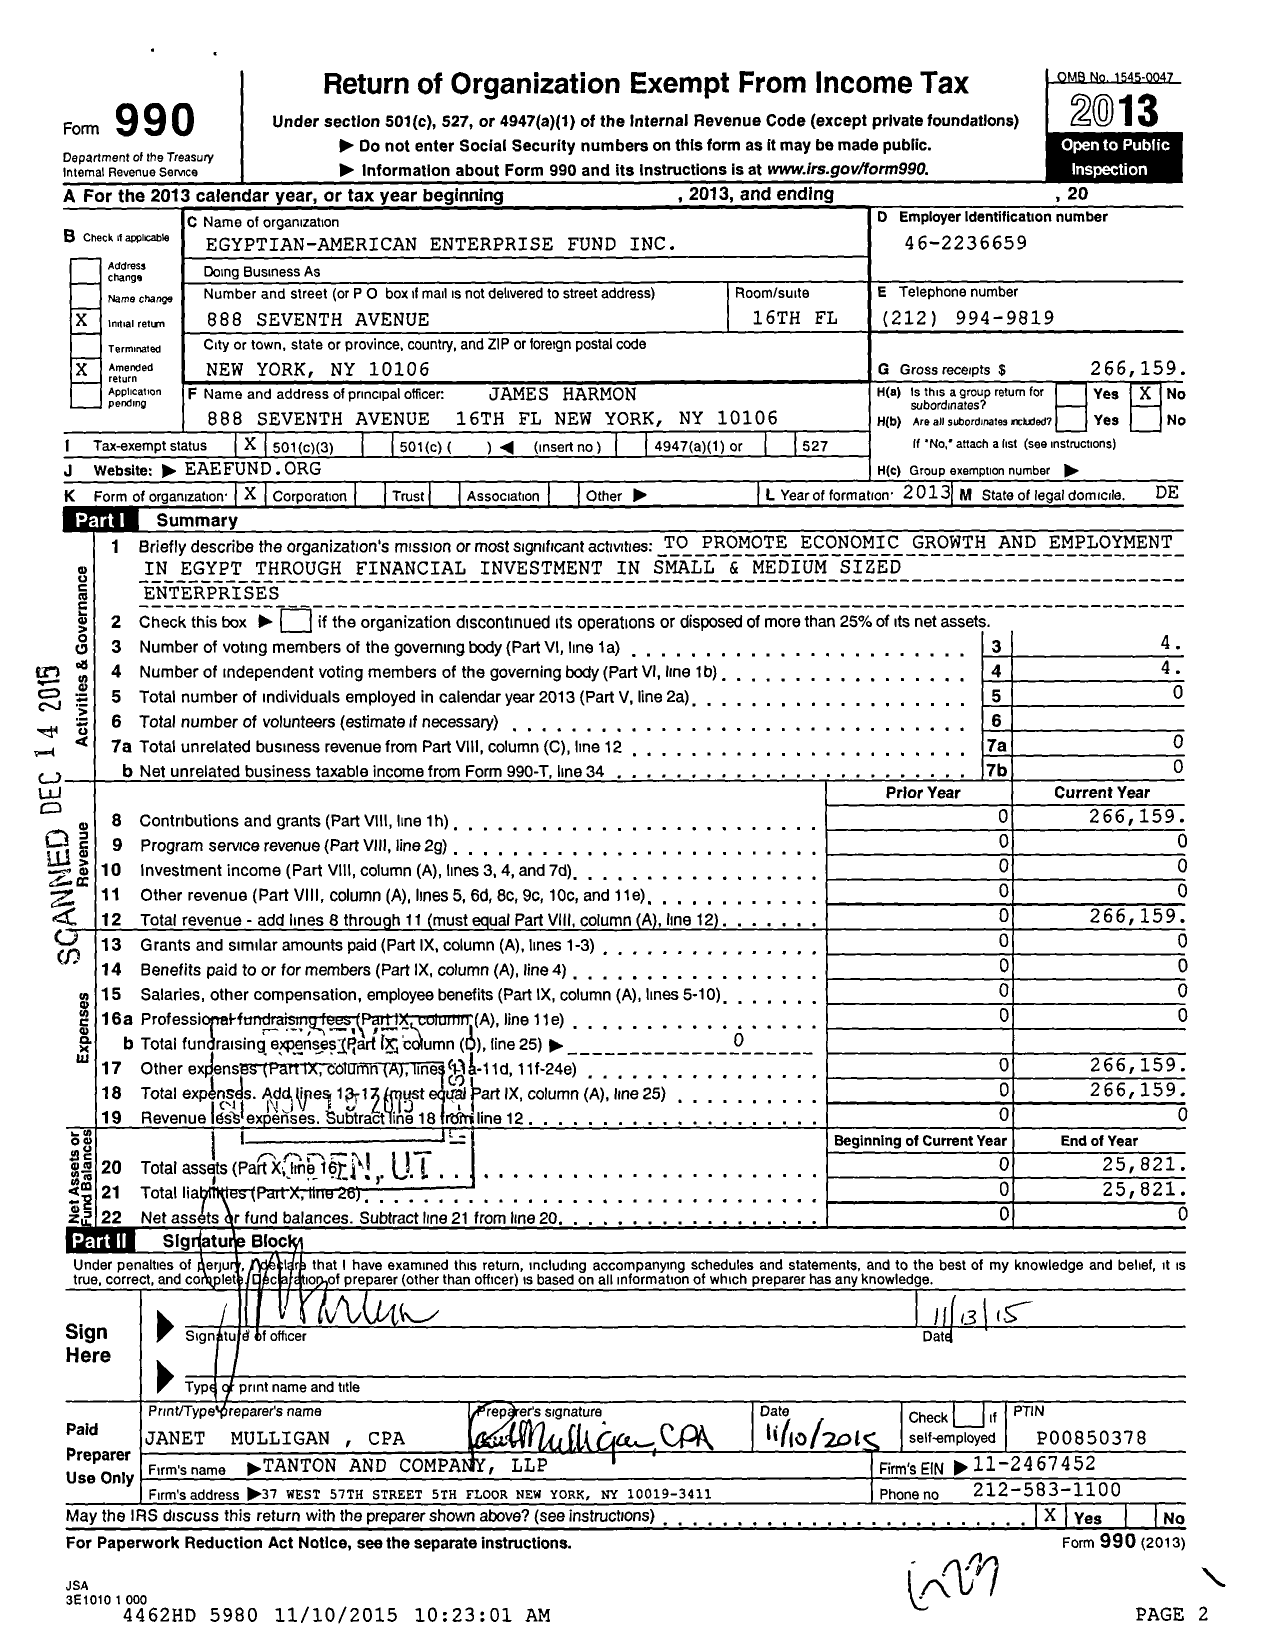 Image of first page of 2013 Form 990 for Egyptian-American Enterprise Fund (EAEF)